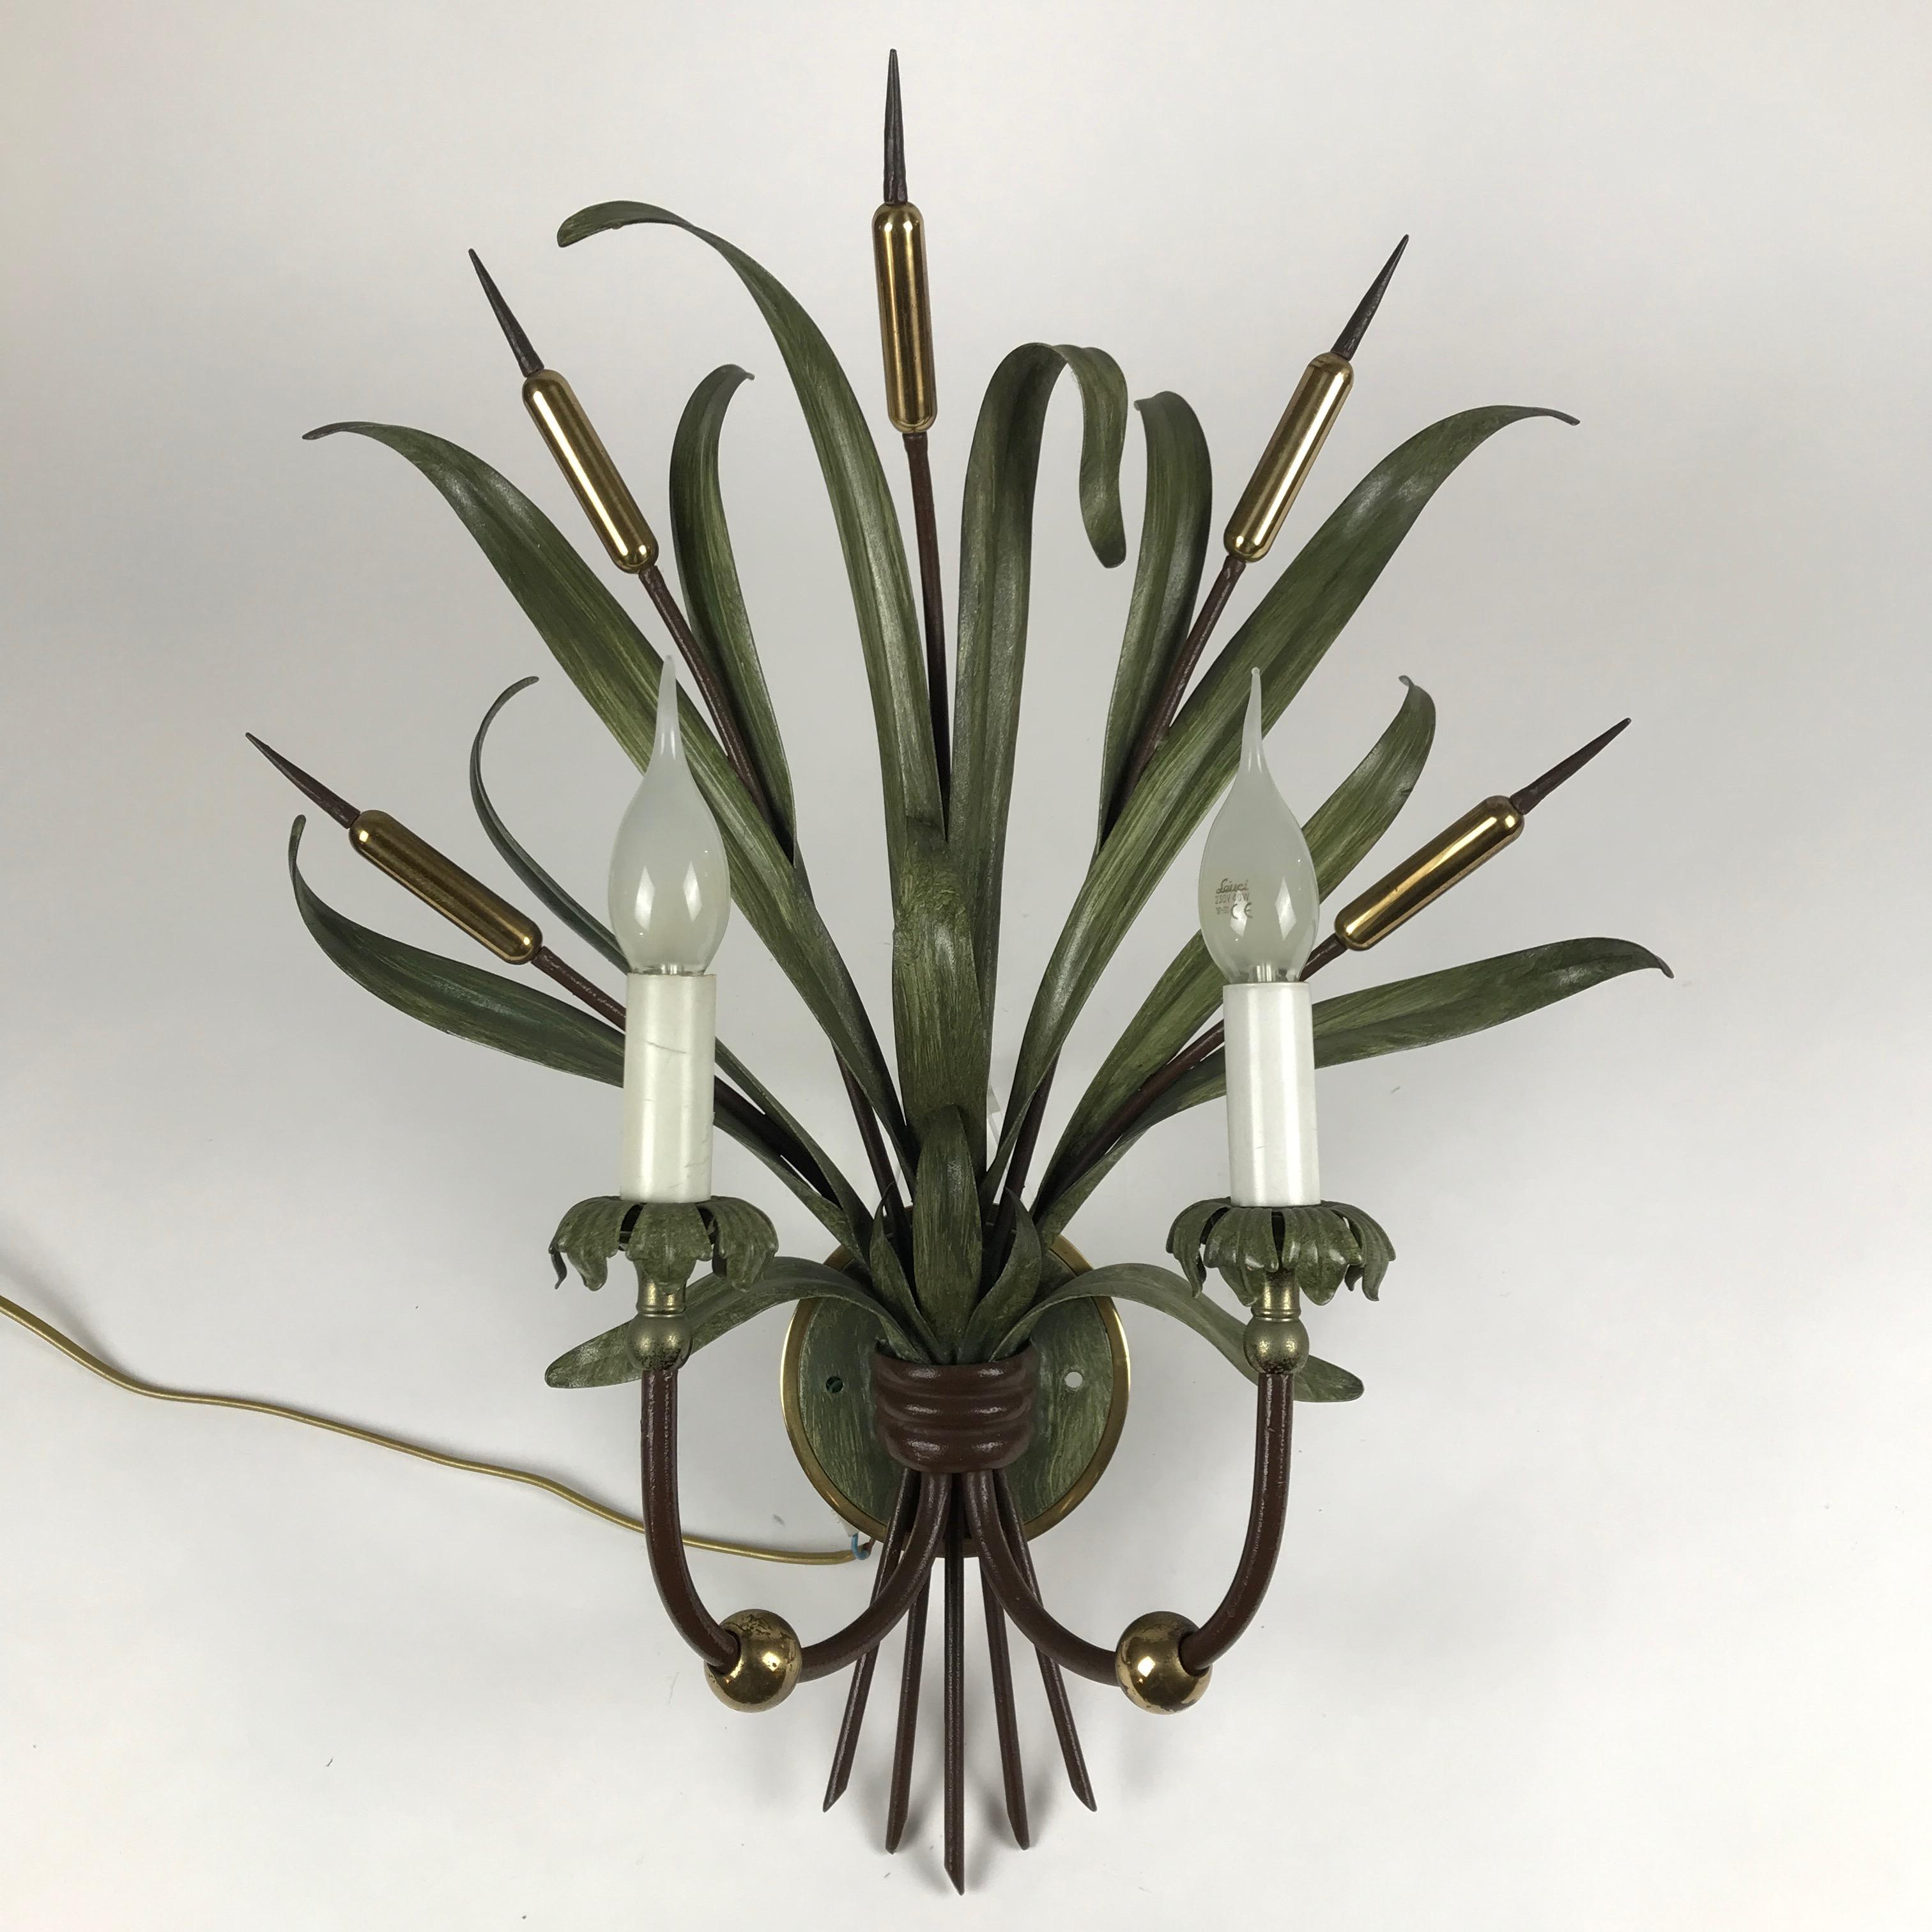 20th Century Pair of Italian Sconces by Banci Firenze 1980 circa with Green Reed Bunches 